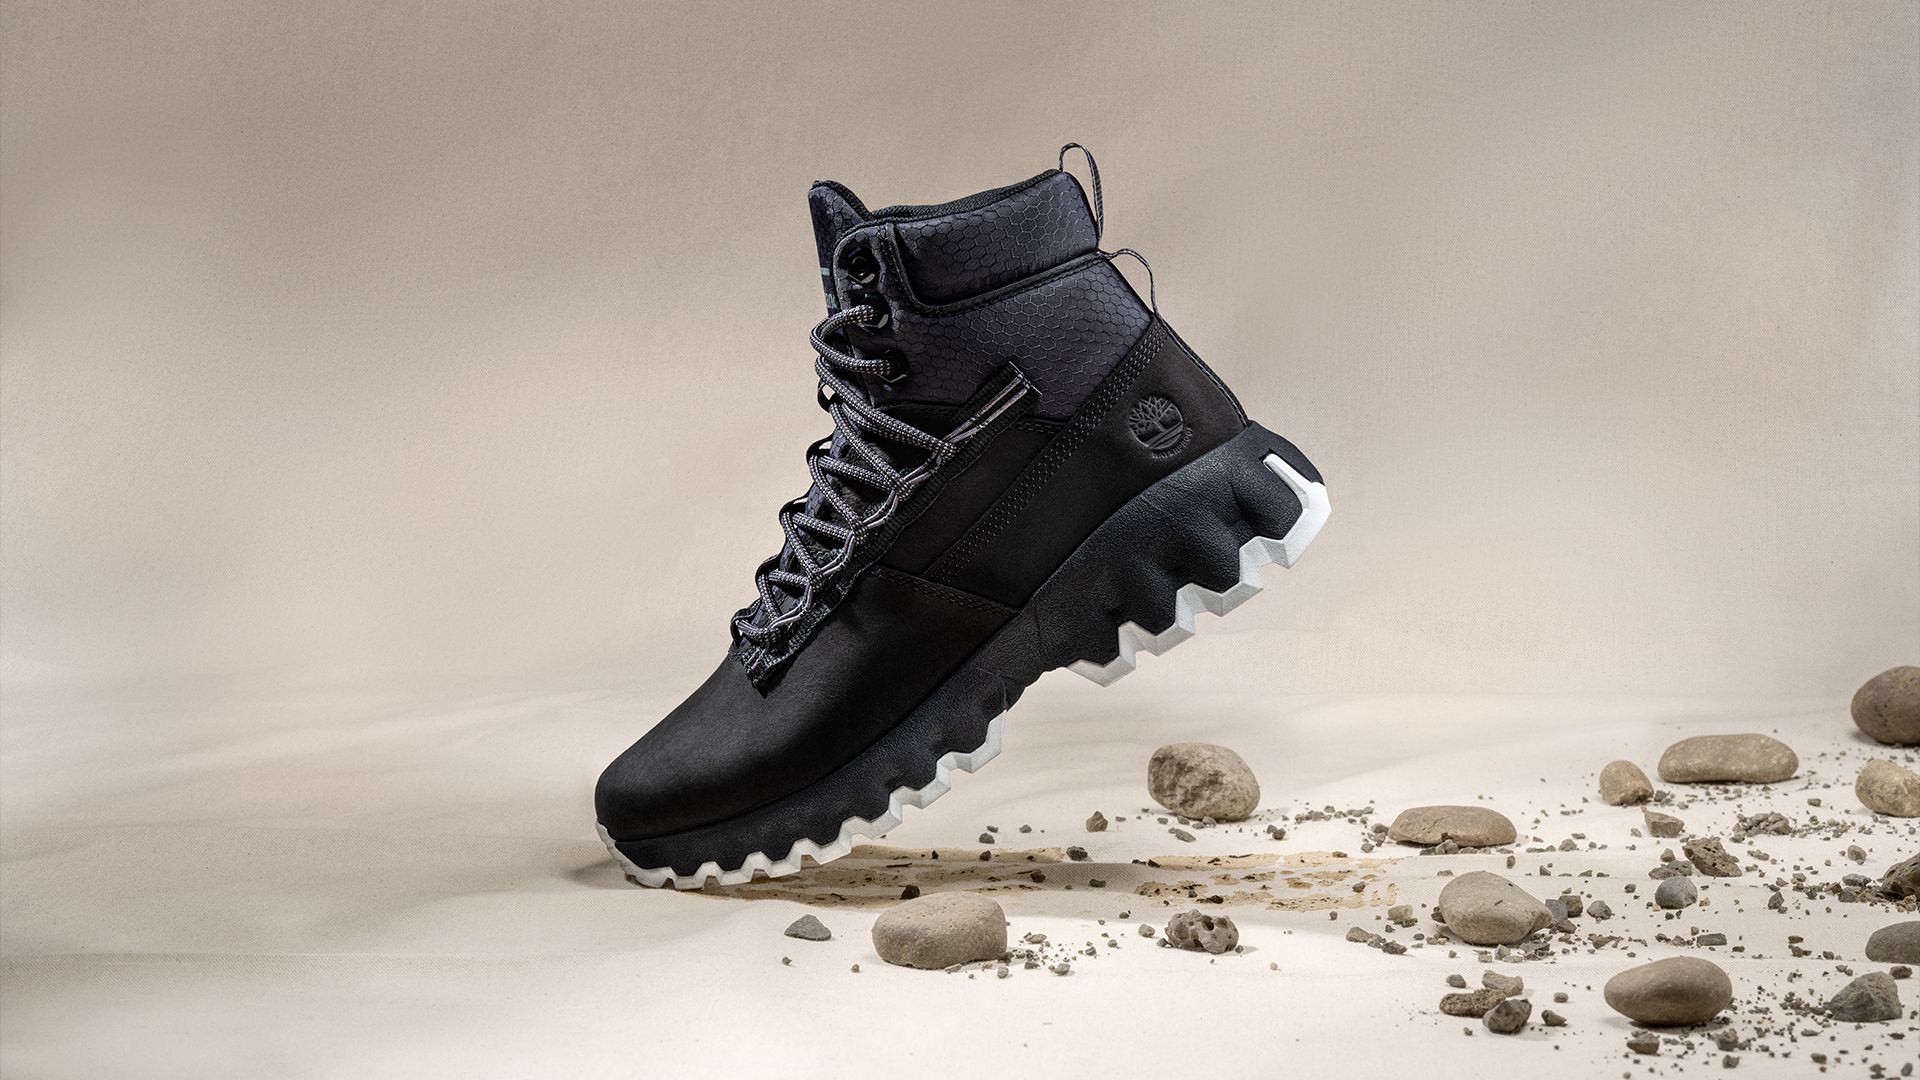 Black Timberland Greenstride Edge boot widht stones and dirt behind it